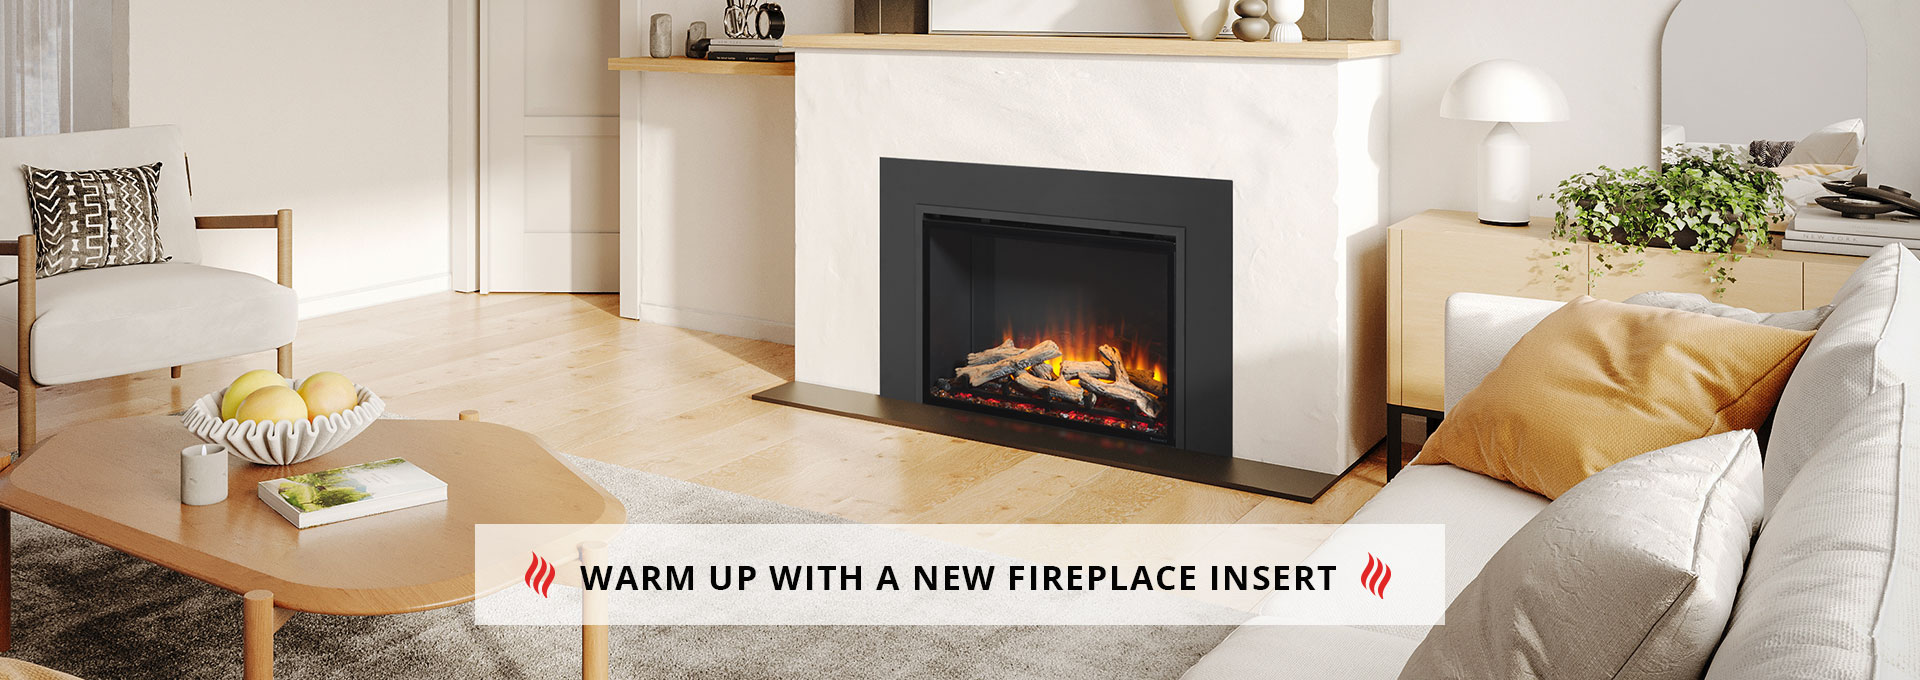 Fireplace Blowers Explained – How Fireplace Fans Work